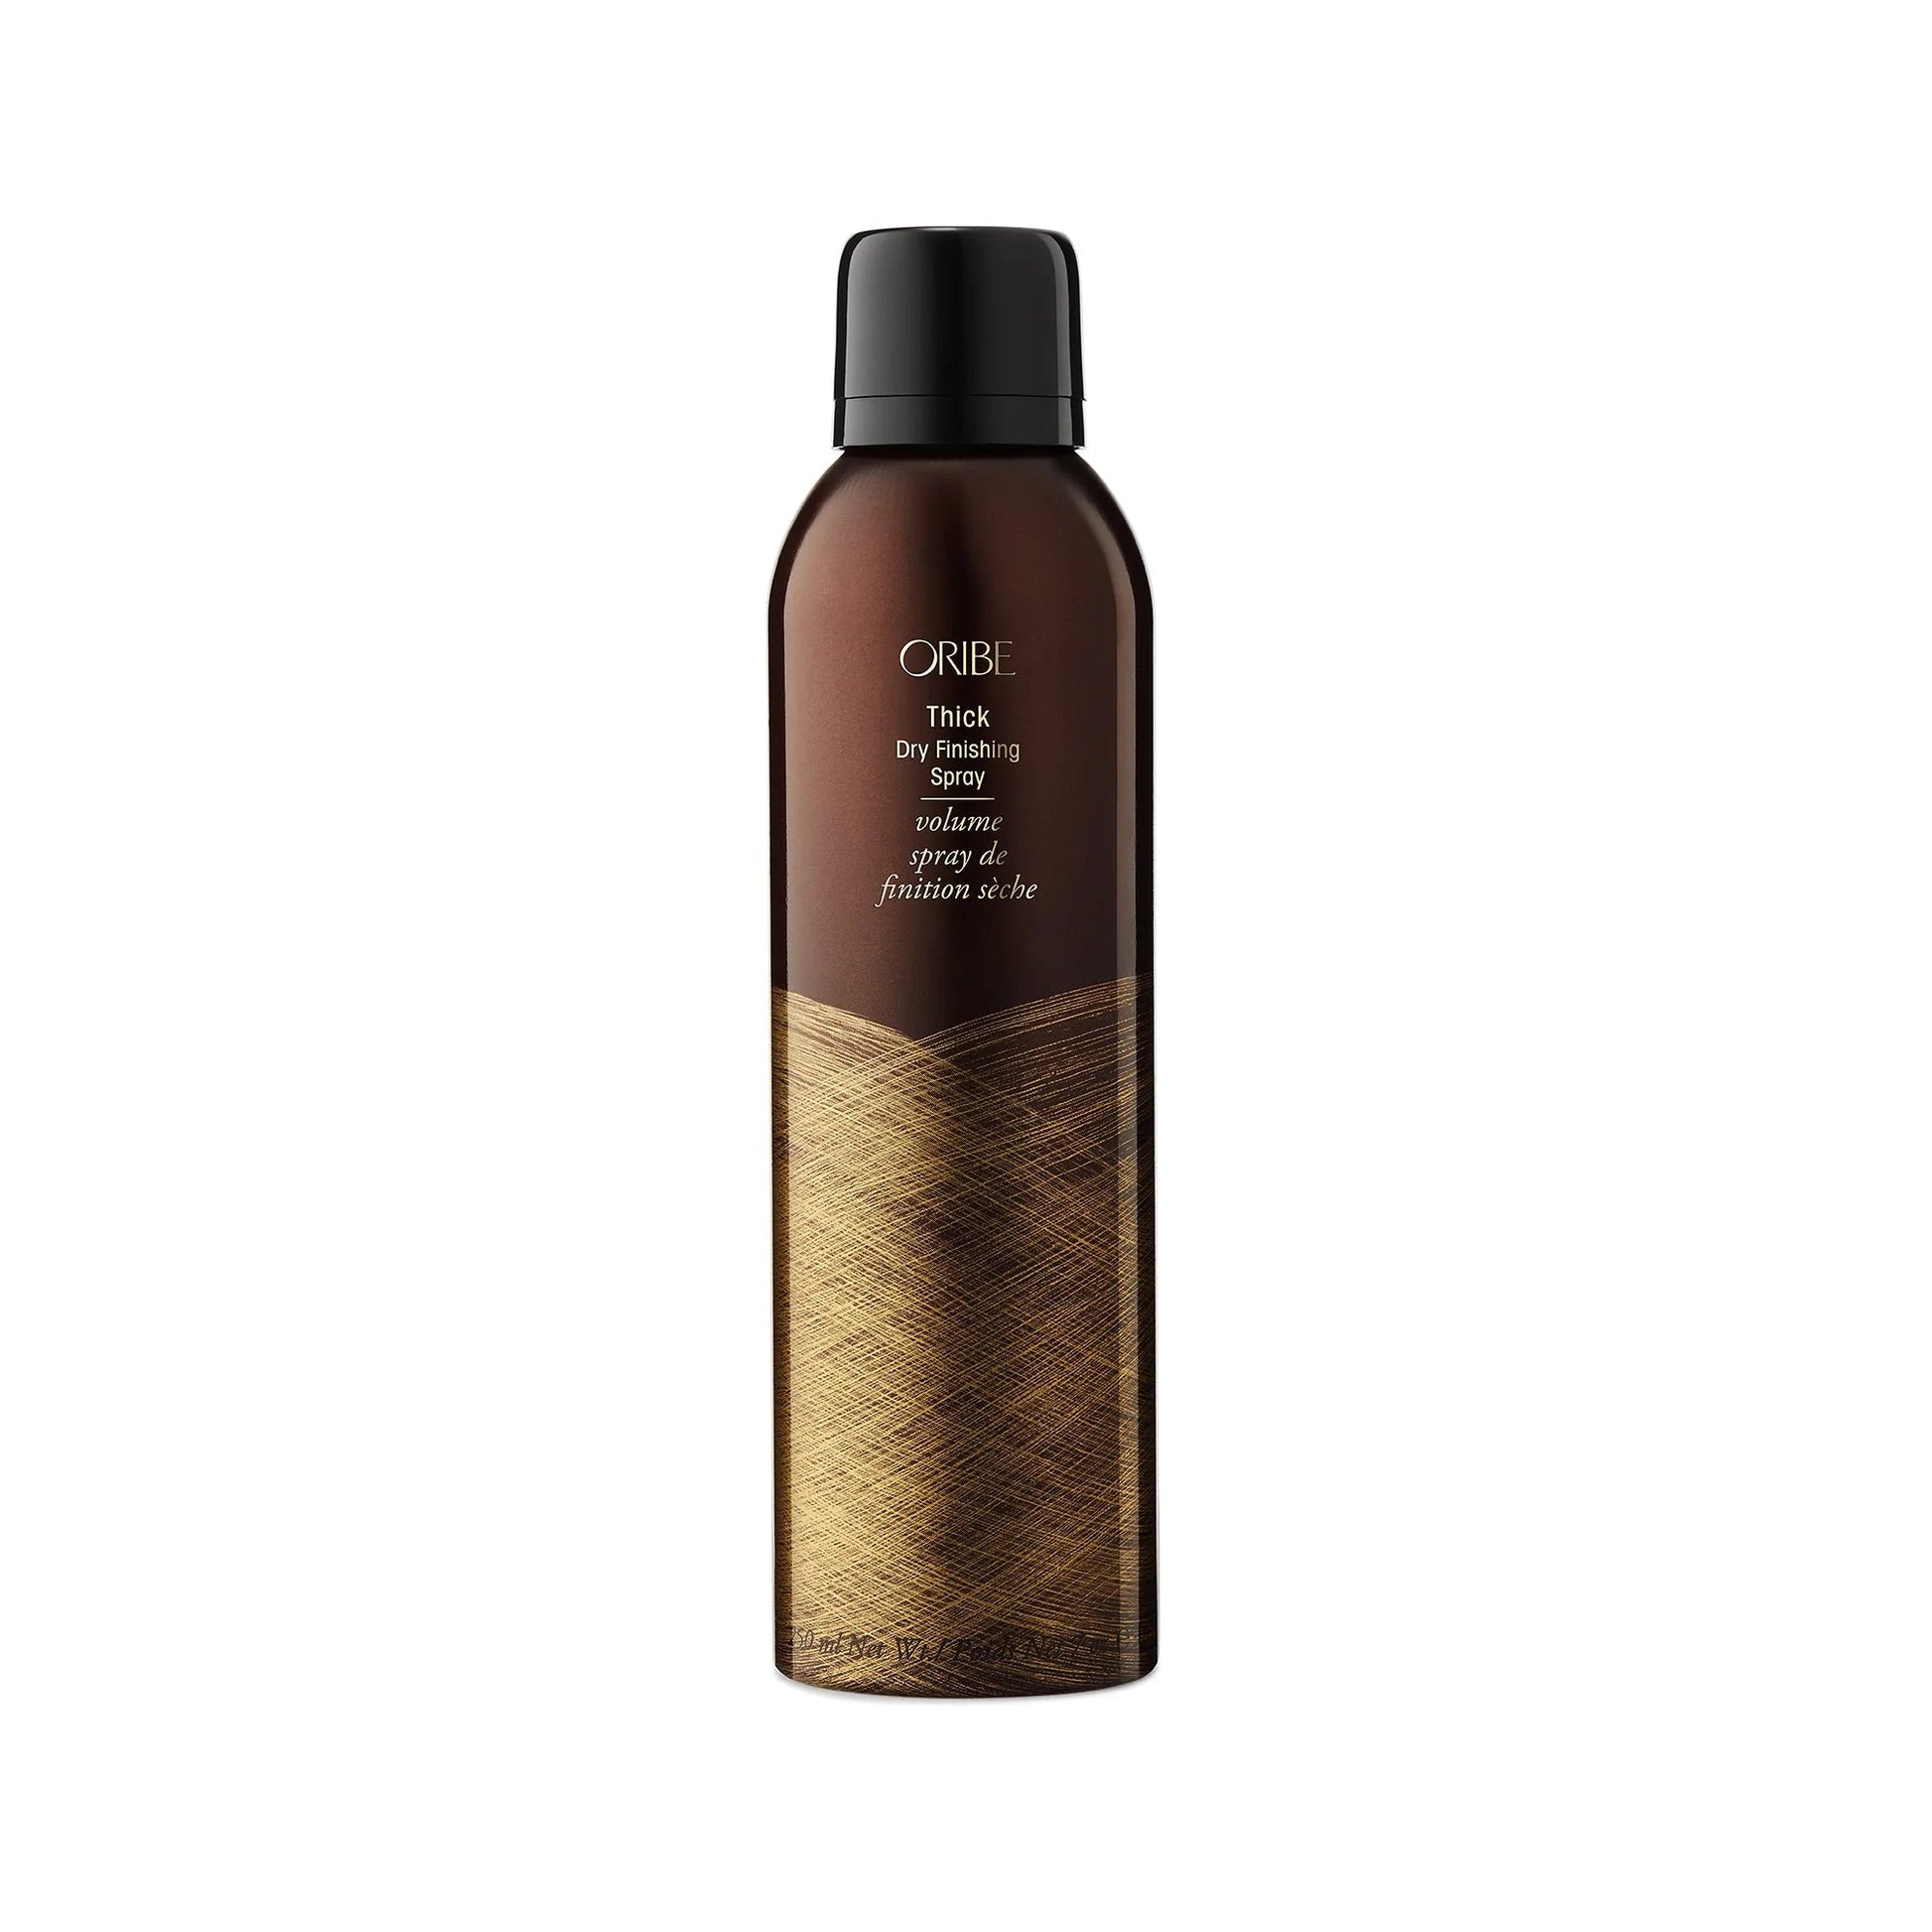 Oribe Thick Dry Finishing Spray - shelley and co